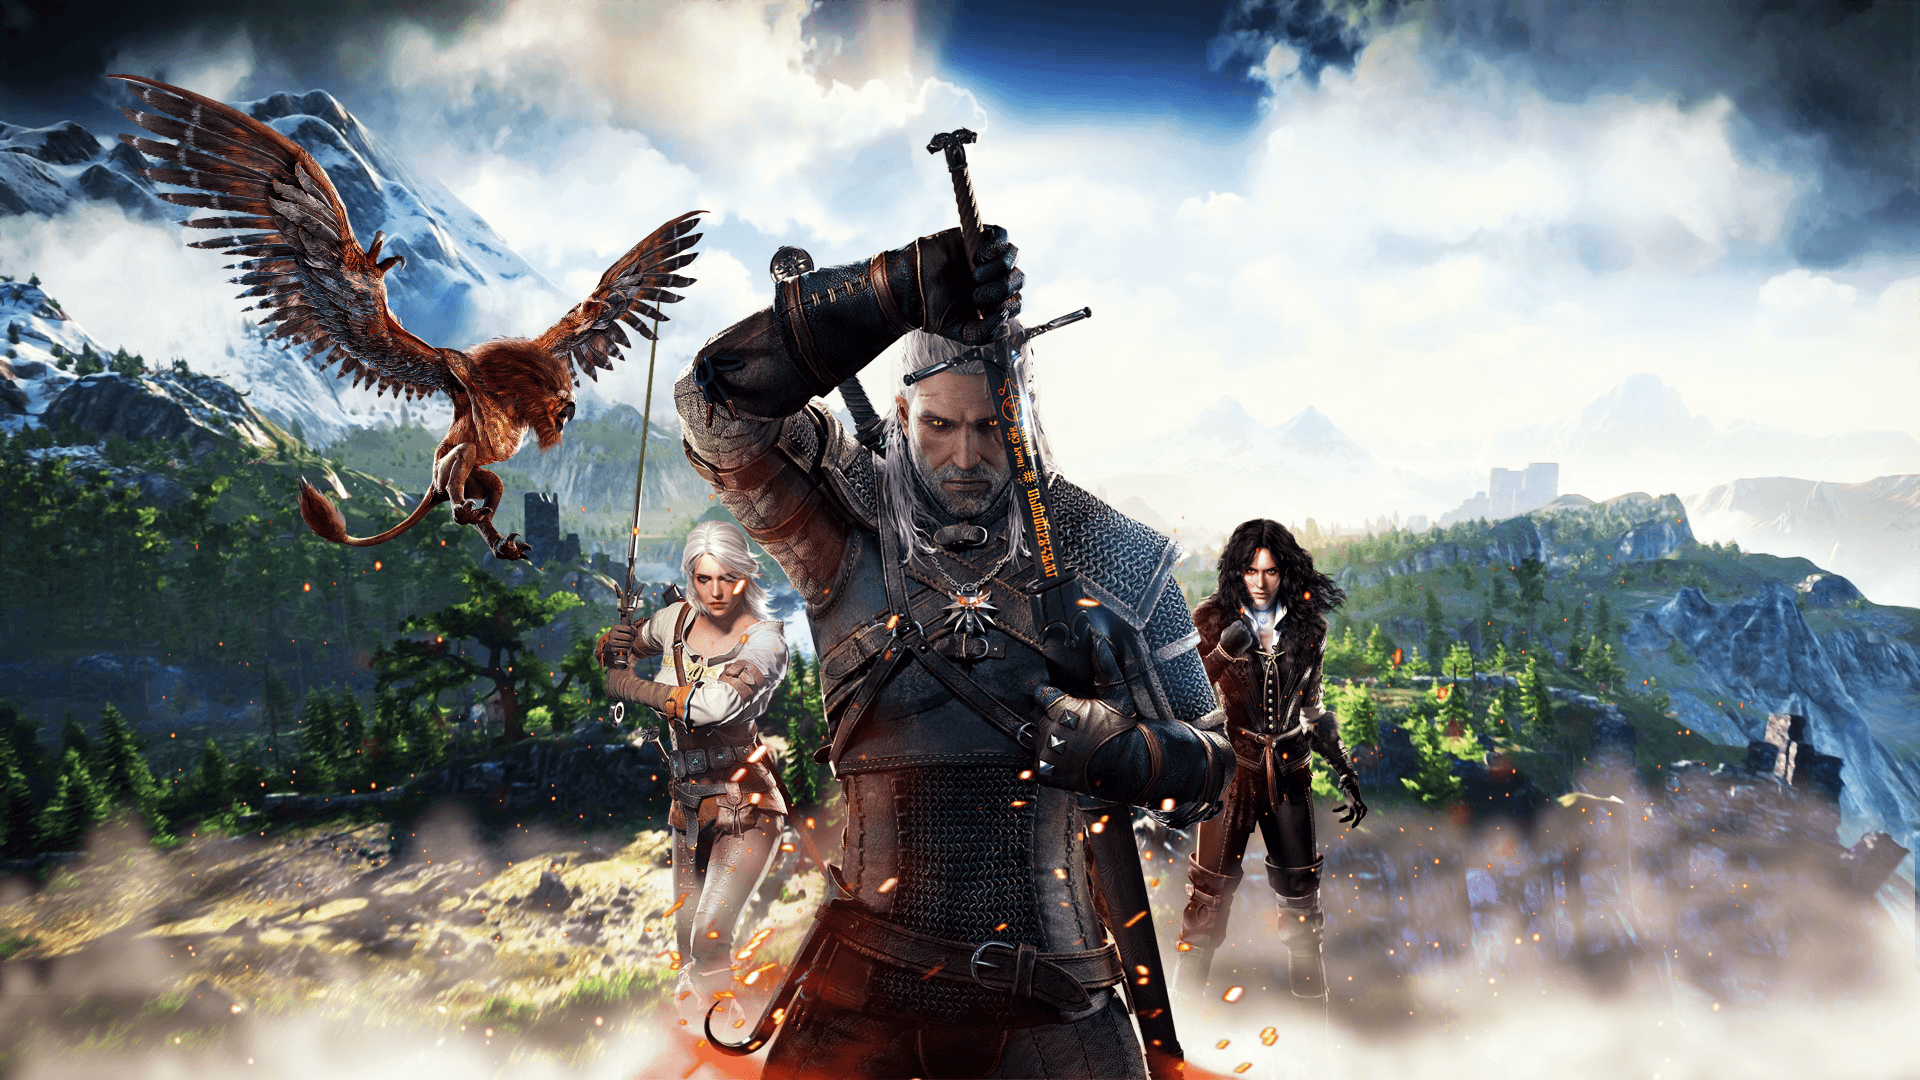 Witcher 3 Wallpapers - Top Free Witcher 3 Backgrounds - WallpaperAccess
